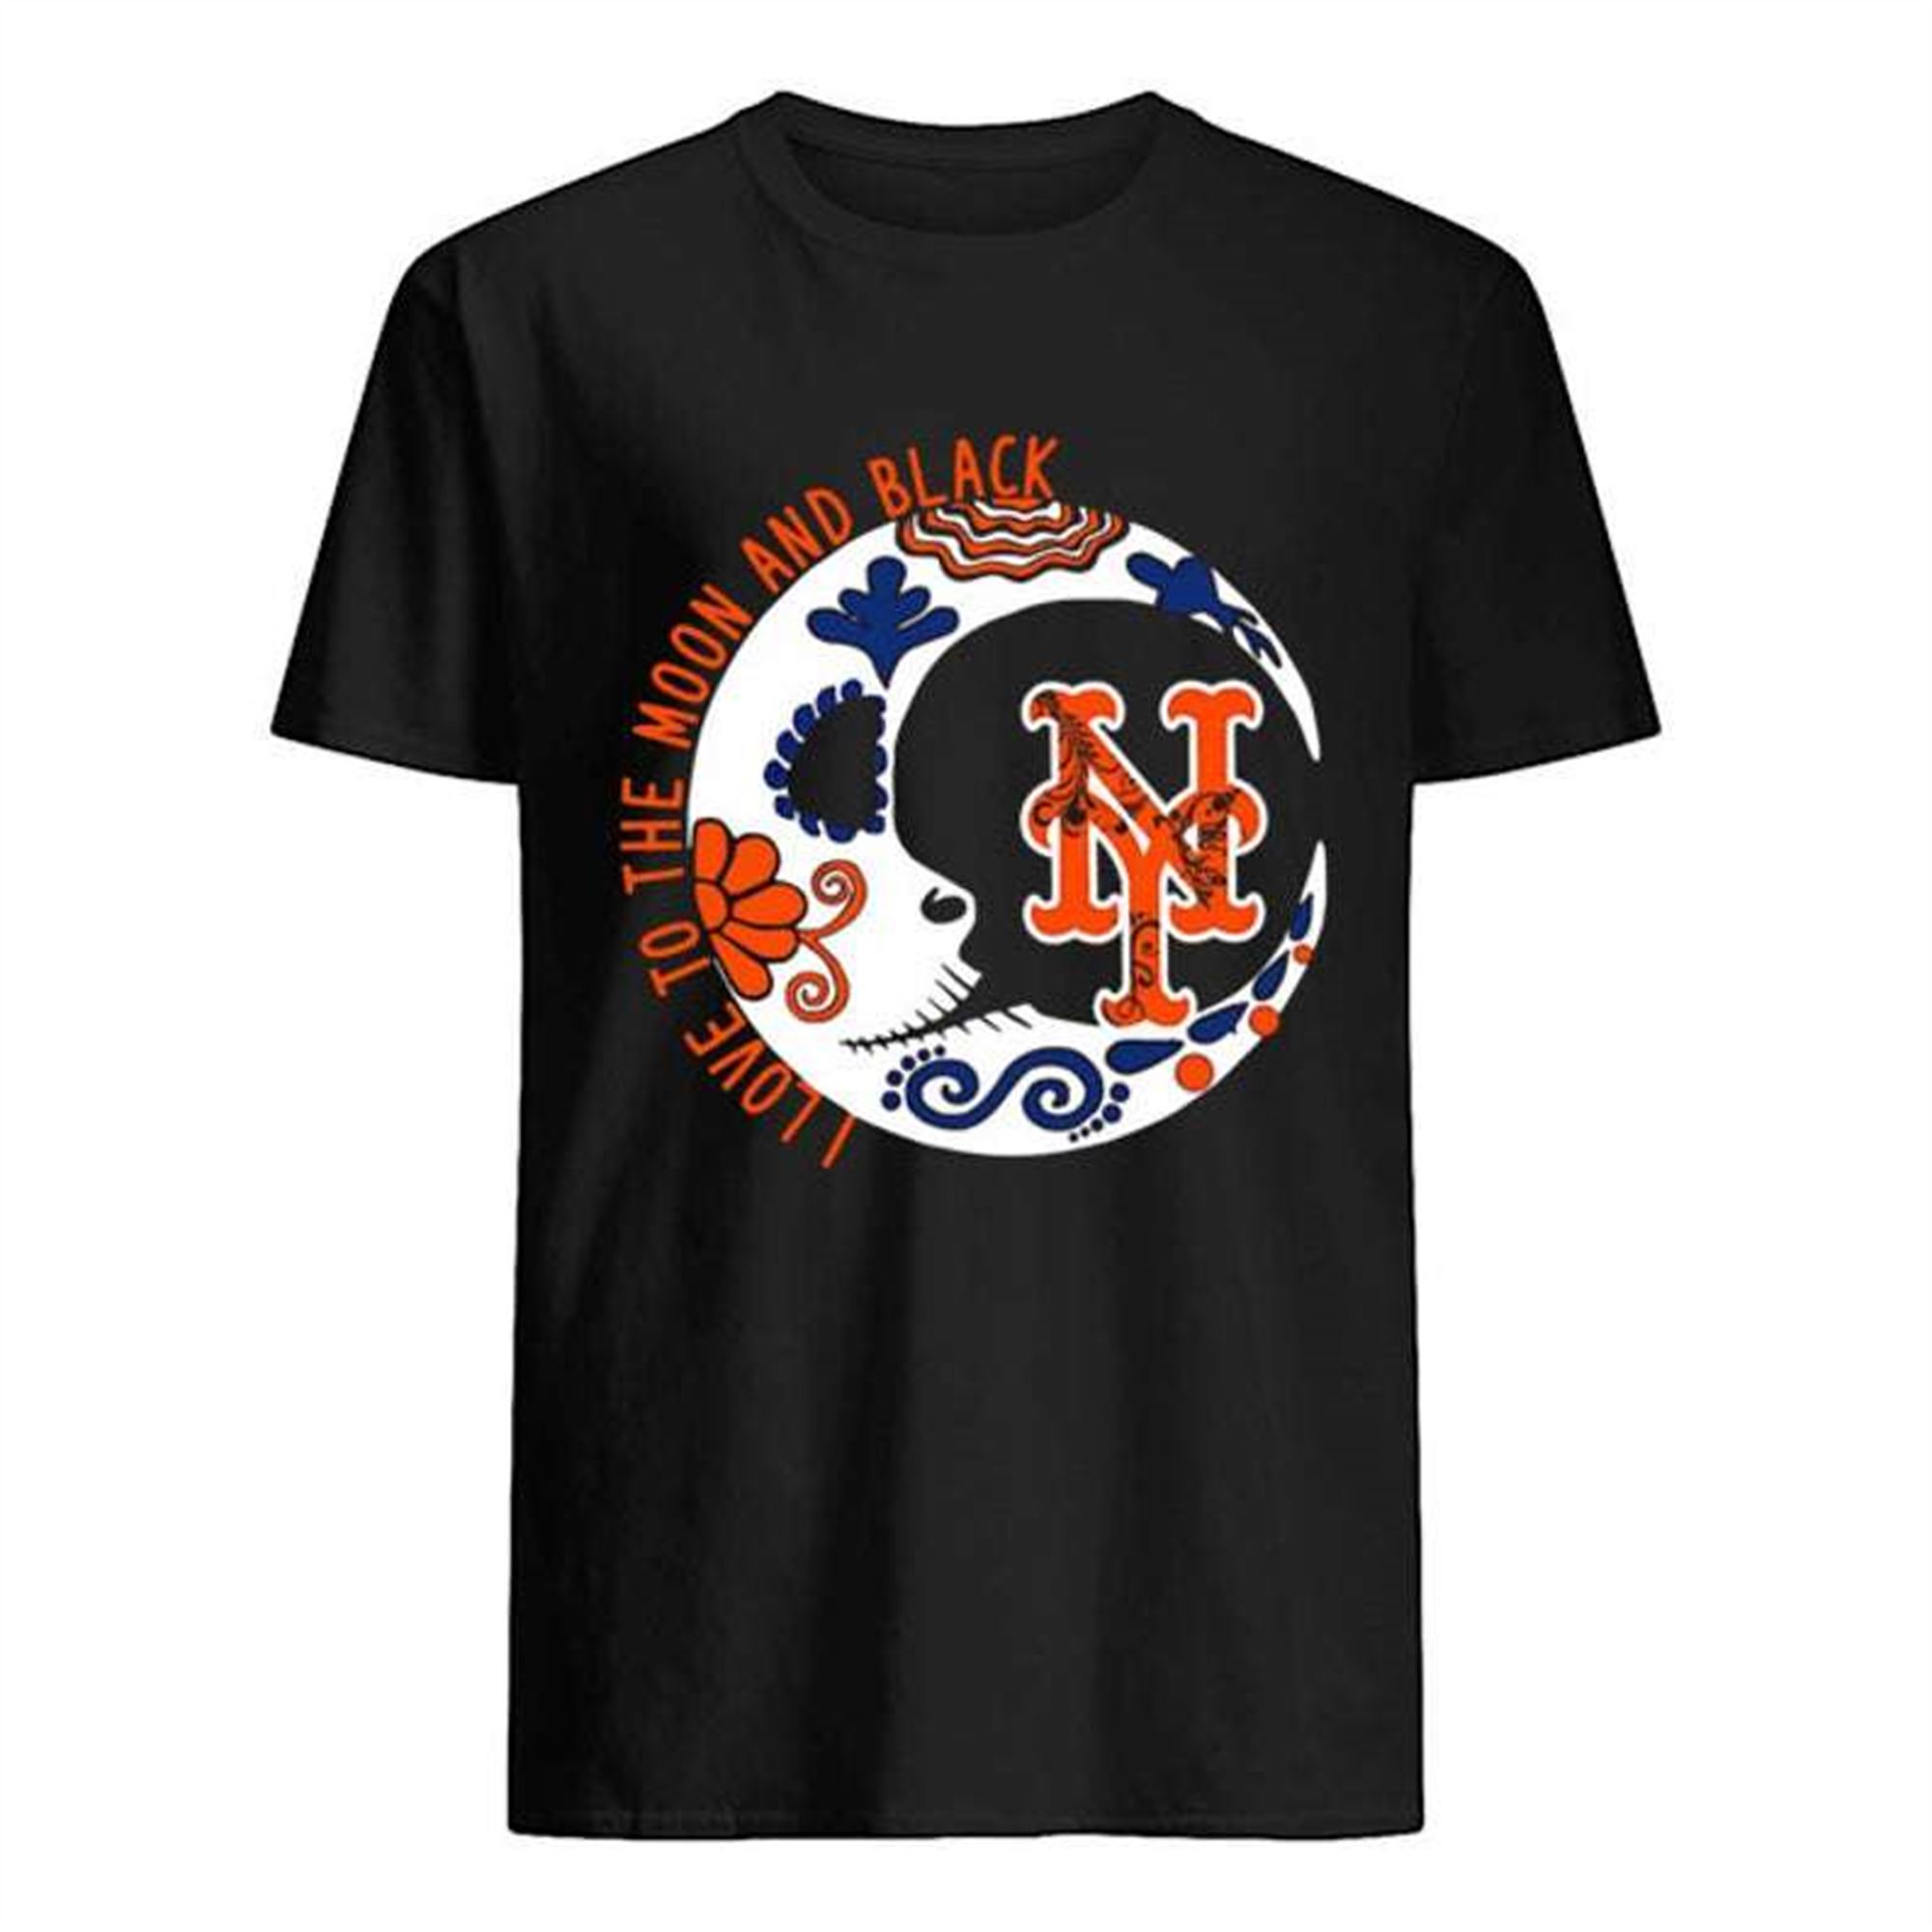 New York Mets I Love To The Moon T-shirt Plus Size Up To 5x